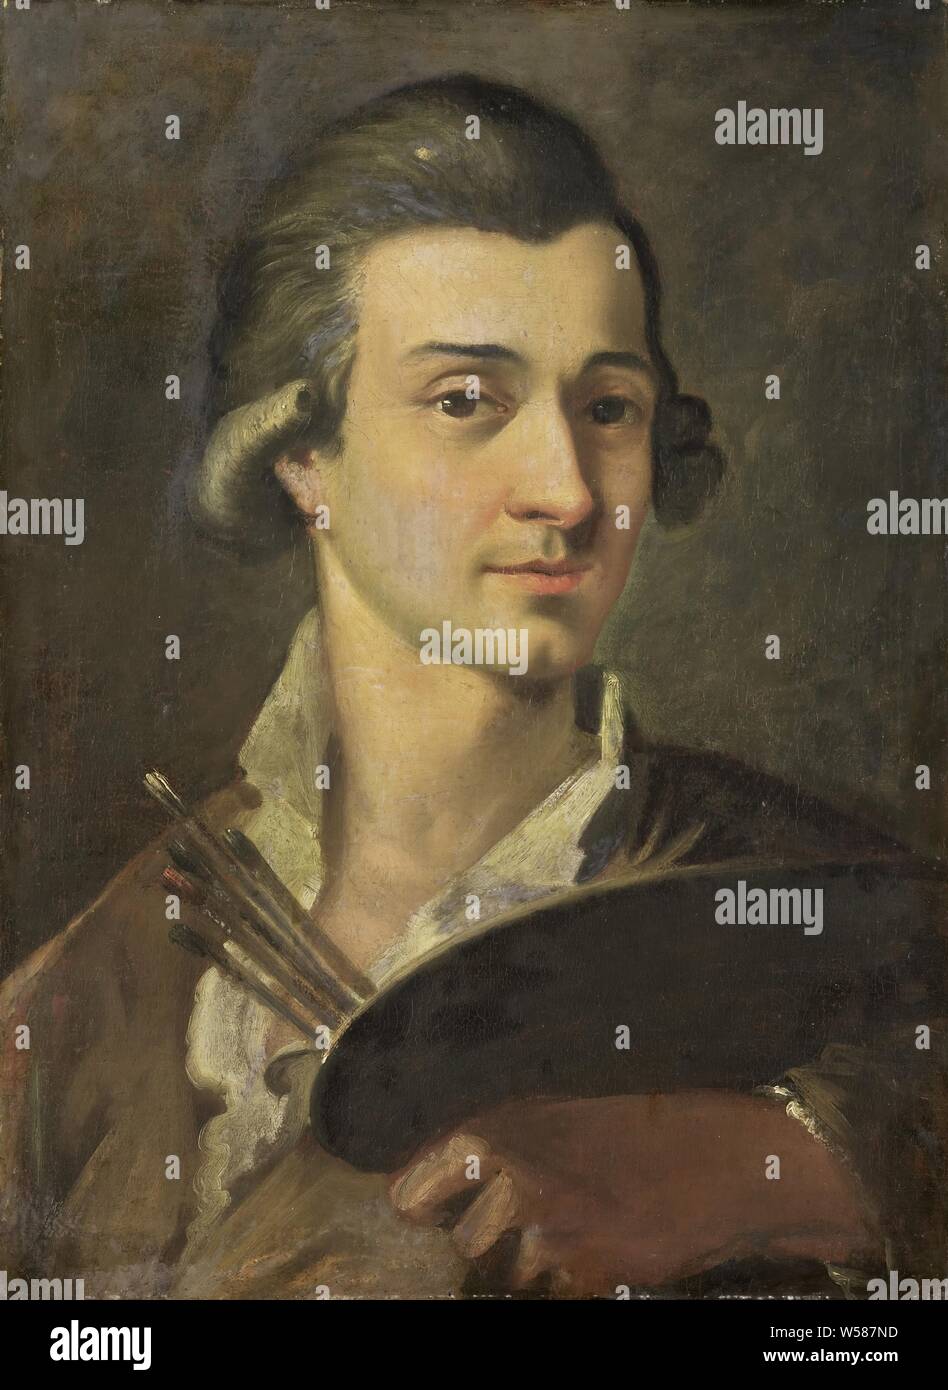 Portrait of a Painter, Portrait of a young painter. Bust, with palette and brushes held up in left hand, portrait, self-portrait of artist, anonymous historical person portrayed, anonymous, Noord-Italie, 1700 - 1799, canvas, oil paint (paint), h 50.1 cm × w 37.2 cm × t 3.3 cm d 5.3 cm Stock Photo